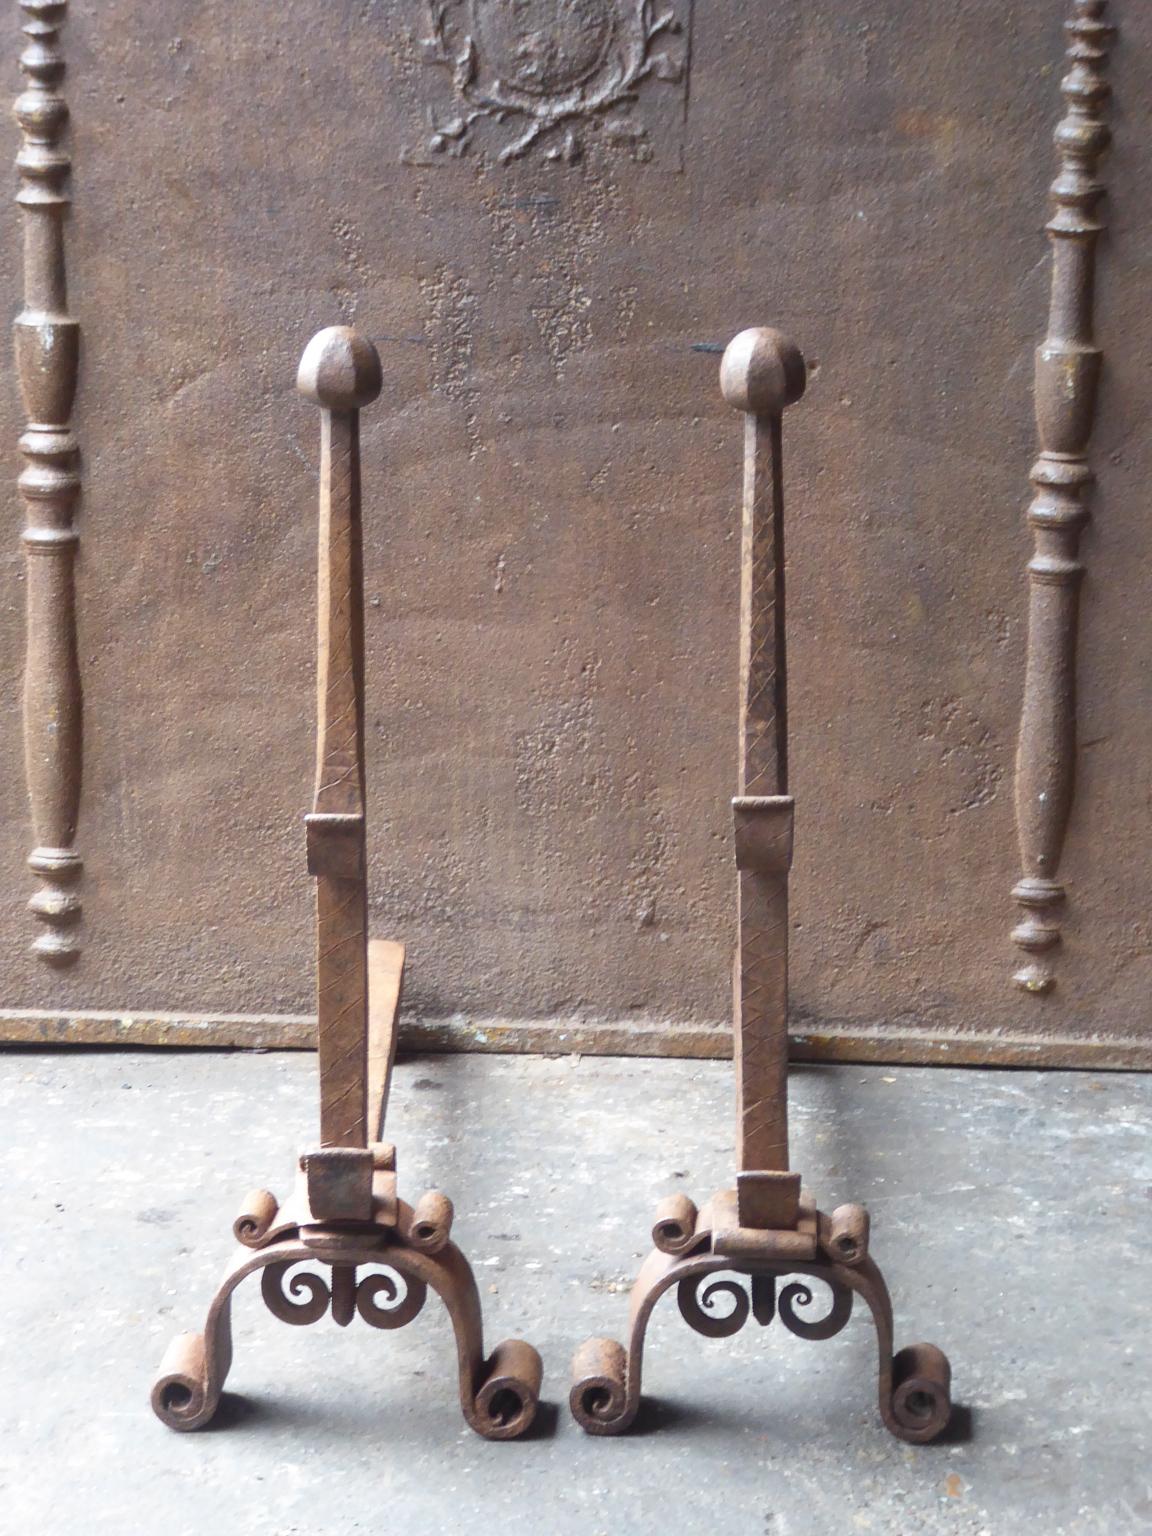 18th-19th century French Louis XV andirons made of wrought iron. The andirons have spit hooks to grill food. The condition is good.







   